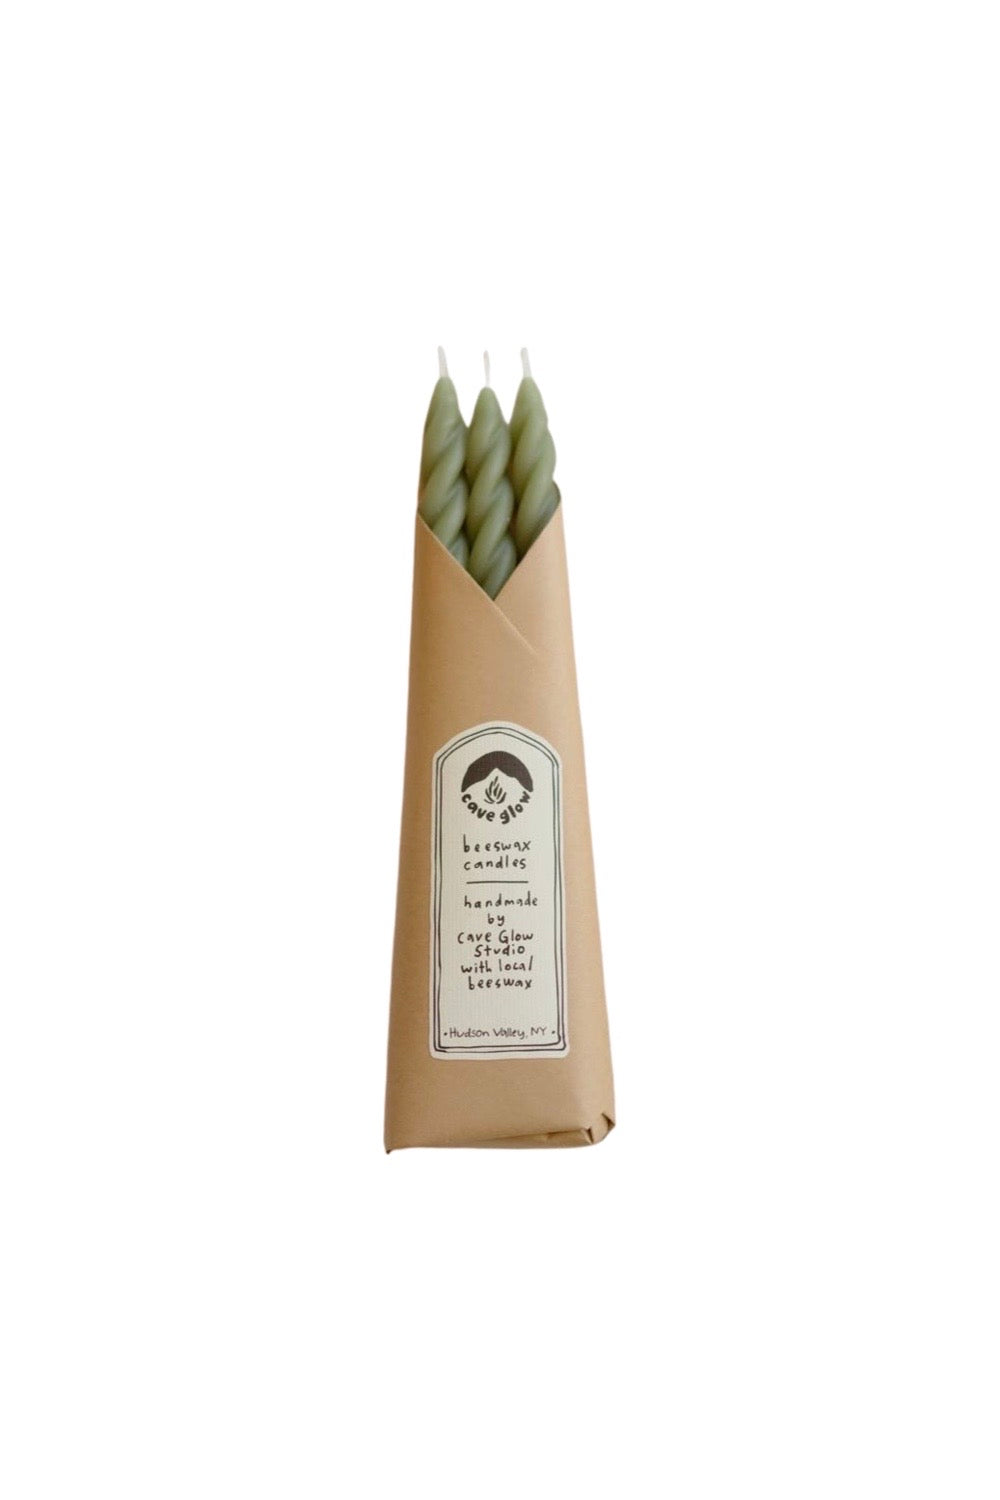 7 Beeswax Spiral Taper Candles – The Bees' Waxy Knees